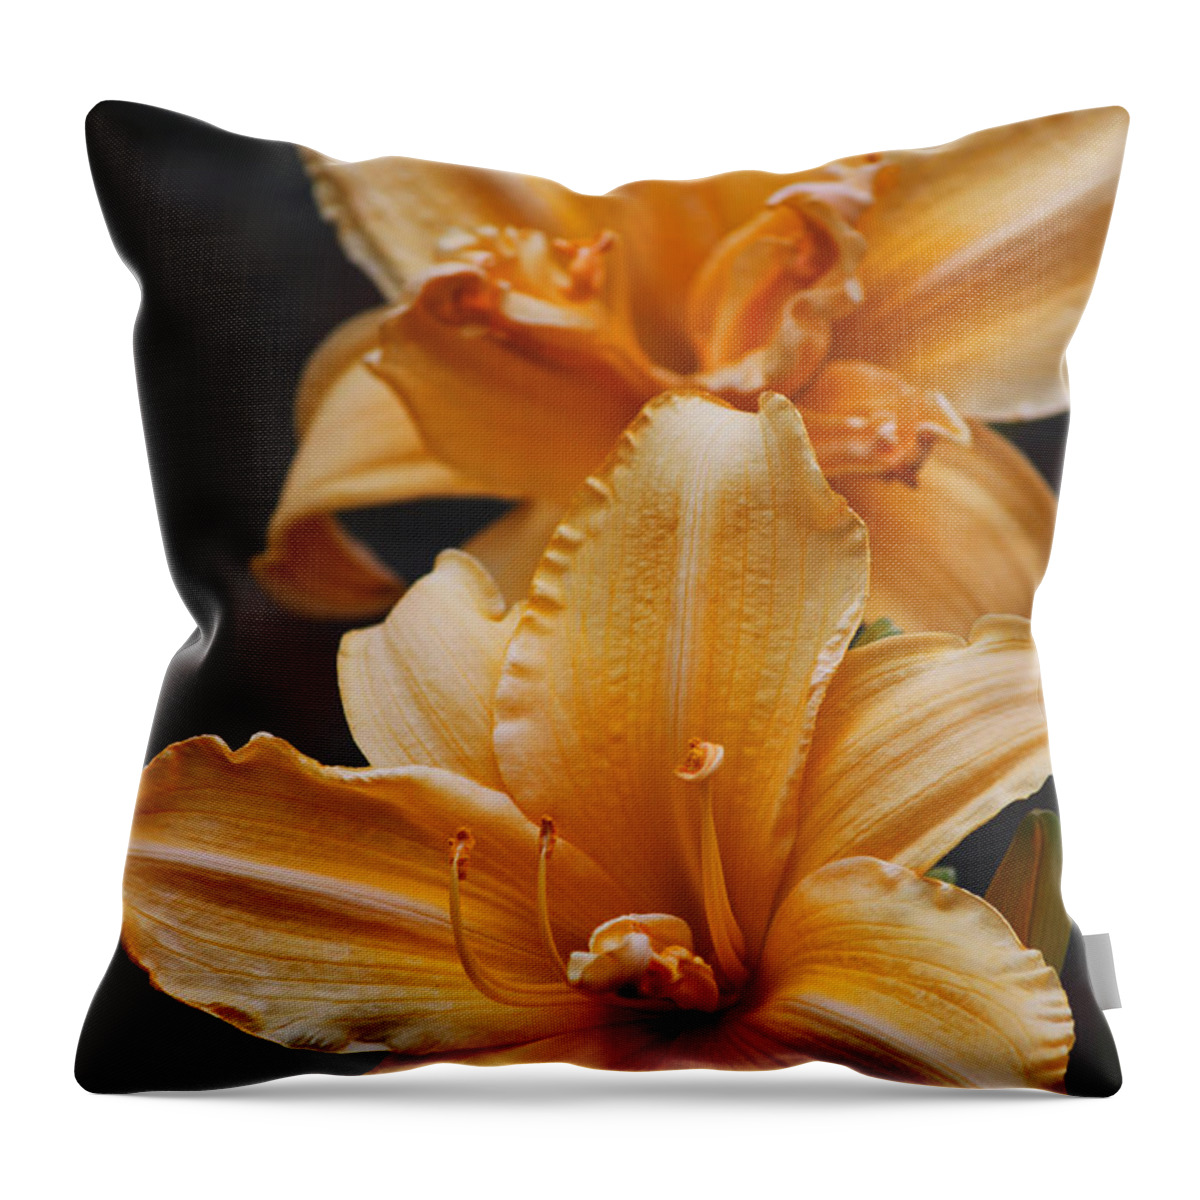 Technicolor Dreamcoat Daylilies Throw Pillow featuring the photograph Technicolor Dreamcoat Daylilies by Suzanne Gaff